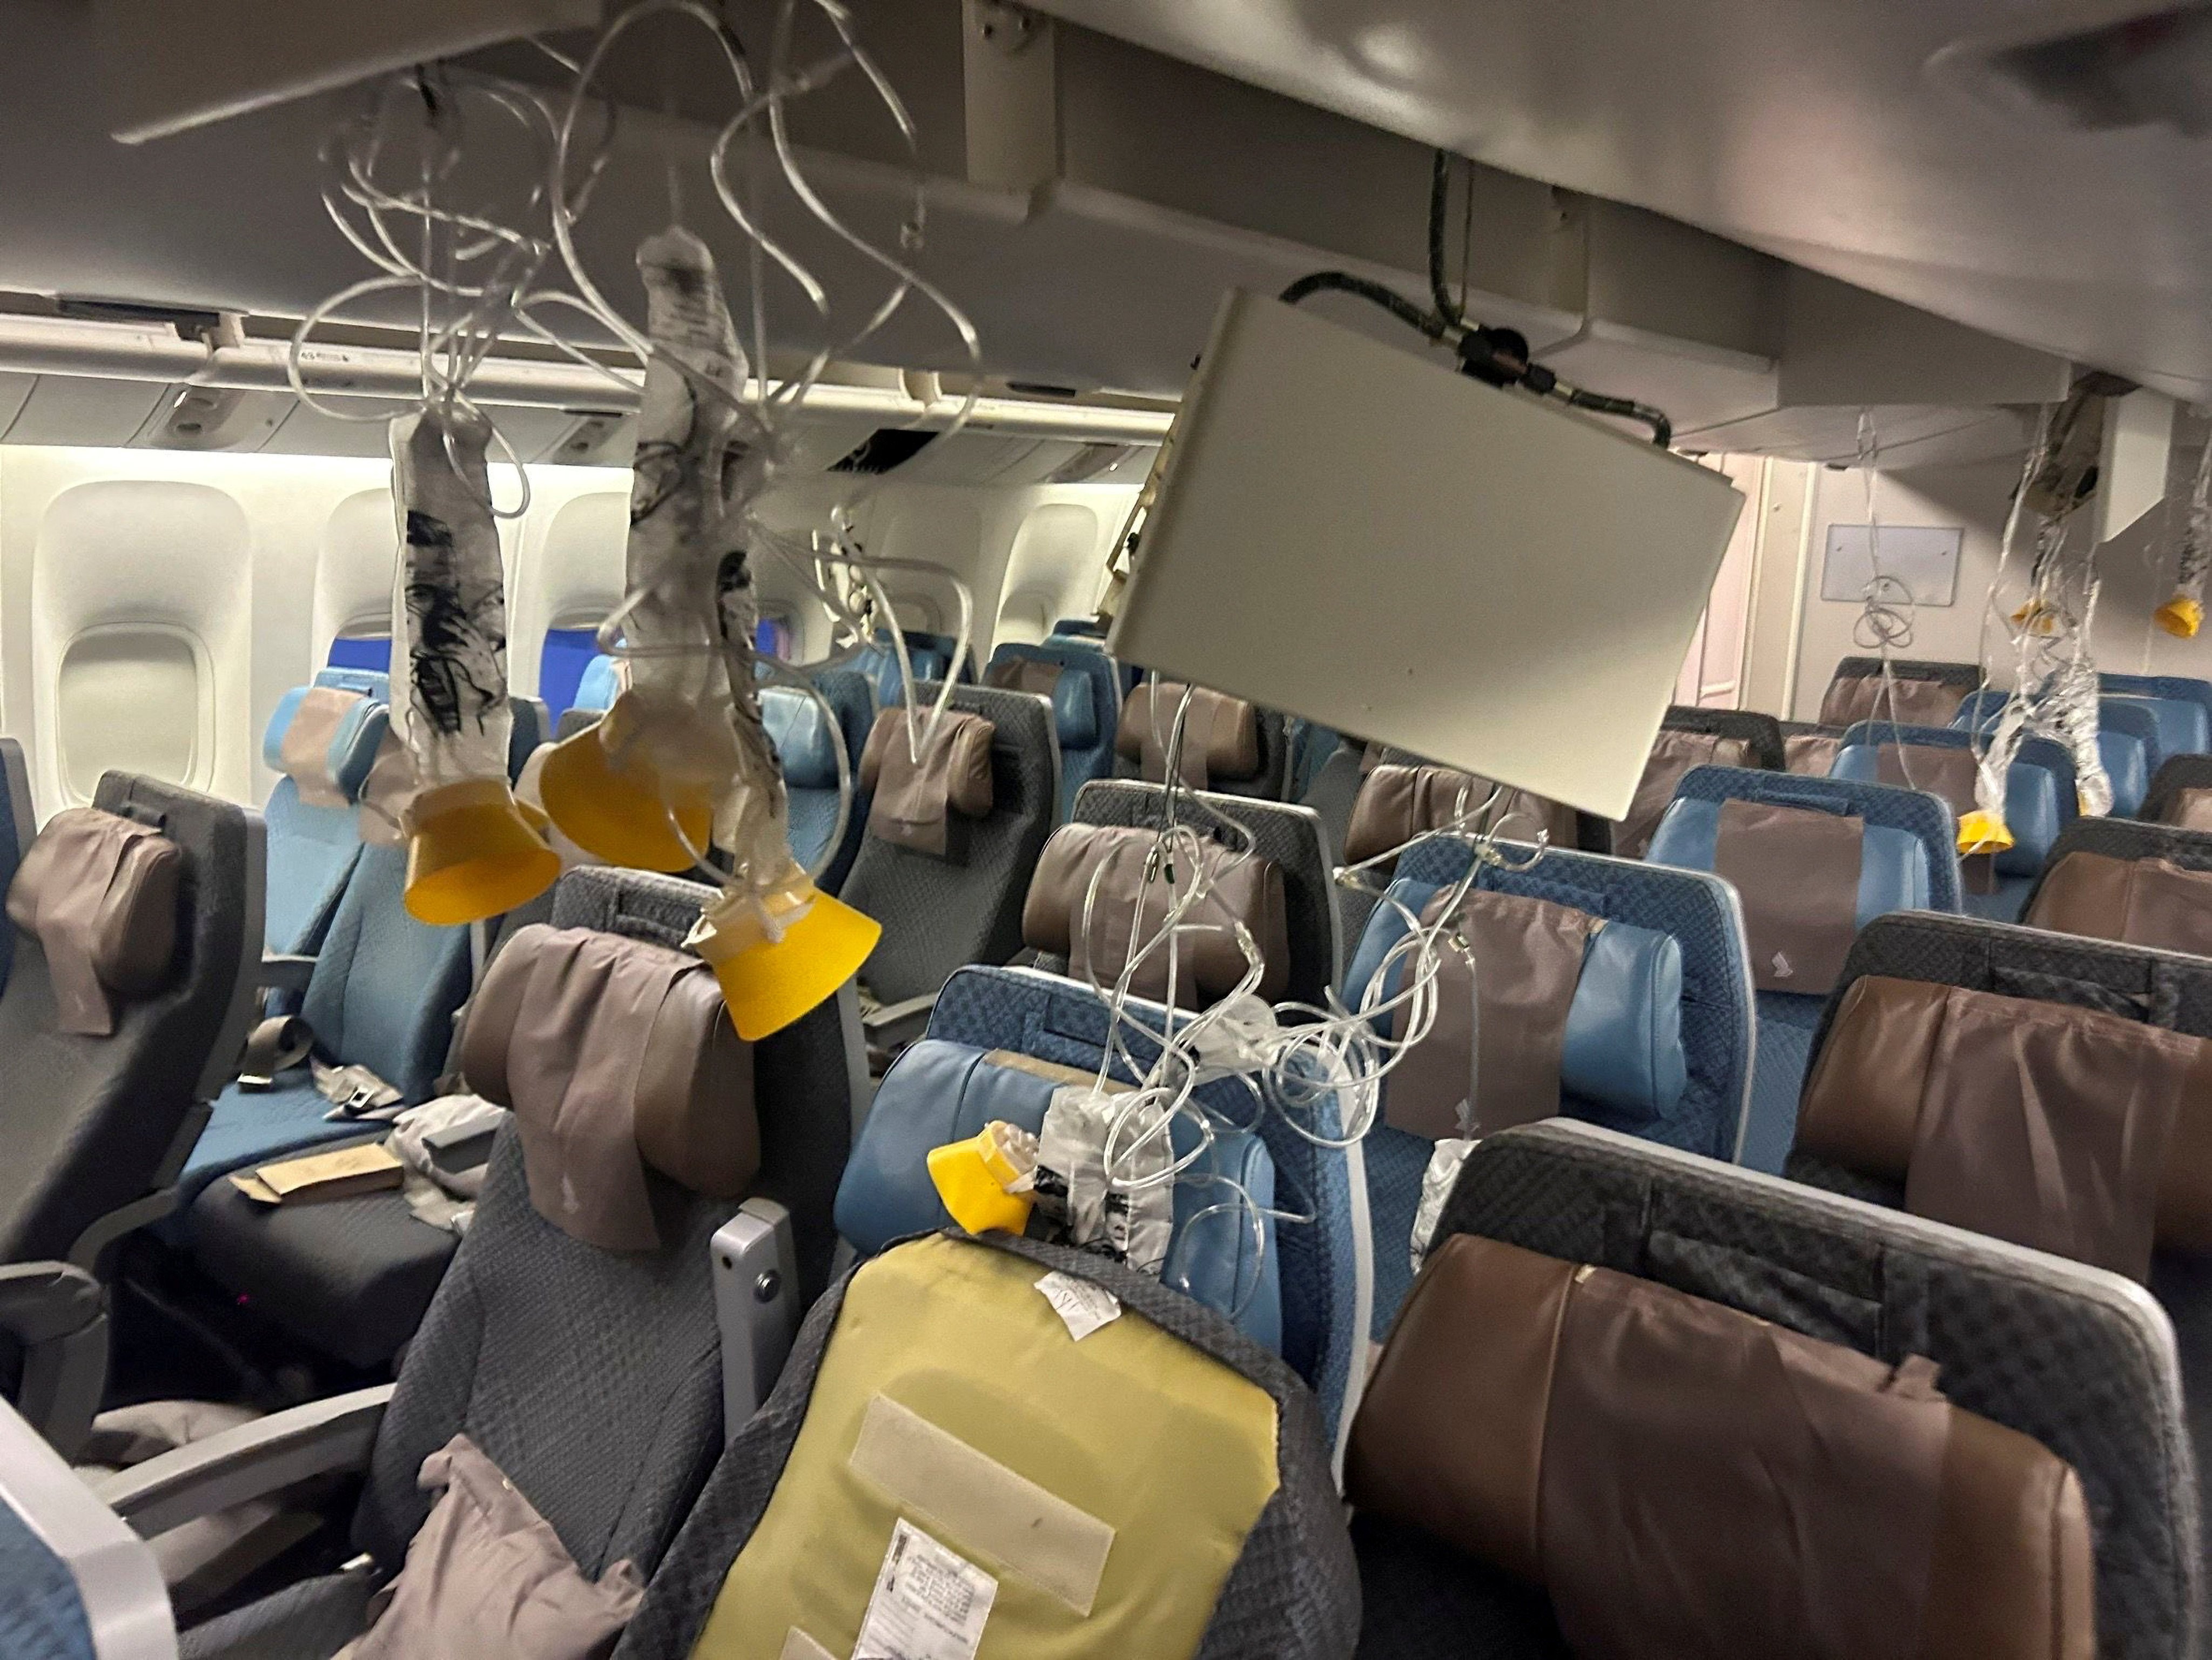 The interior of the Singapore Airline flight that ran into severe turbulence. Photo: Reuters